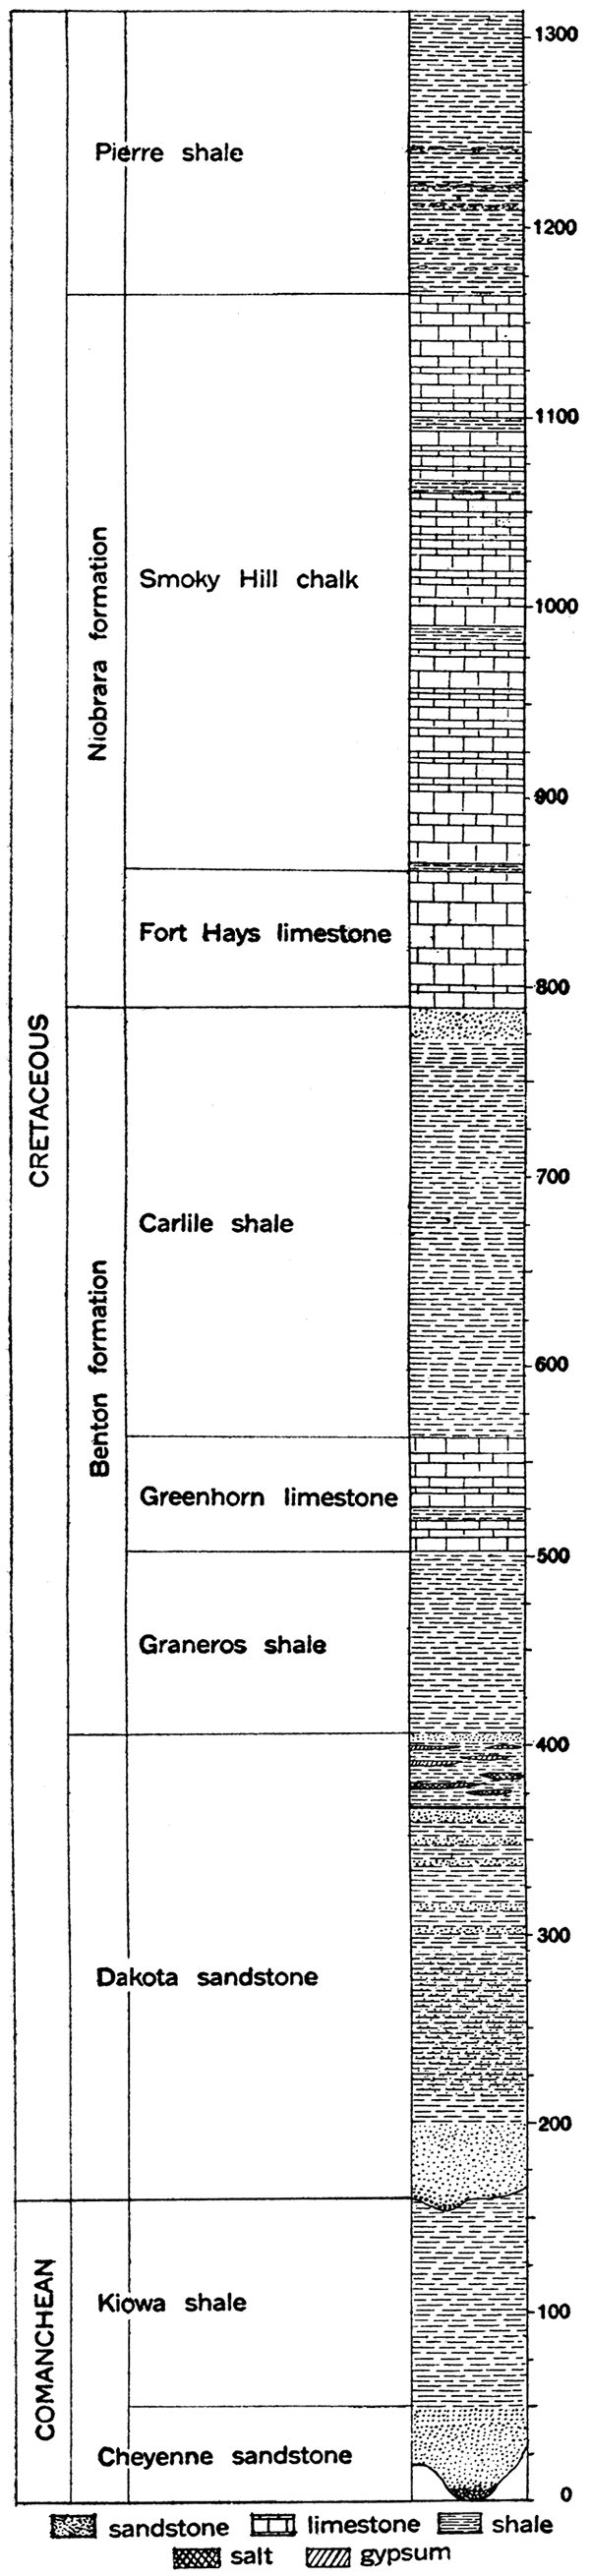 Generalized section of the Comanchean and Cretaceous systems in Kansas.